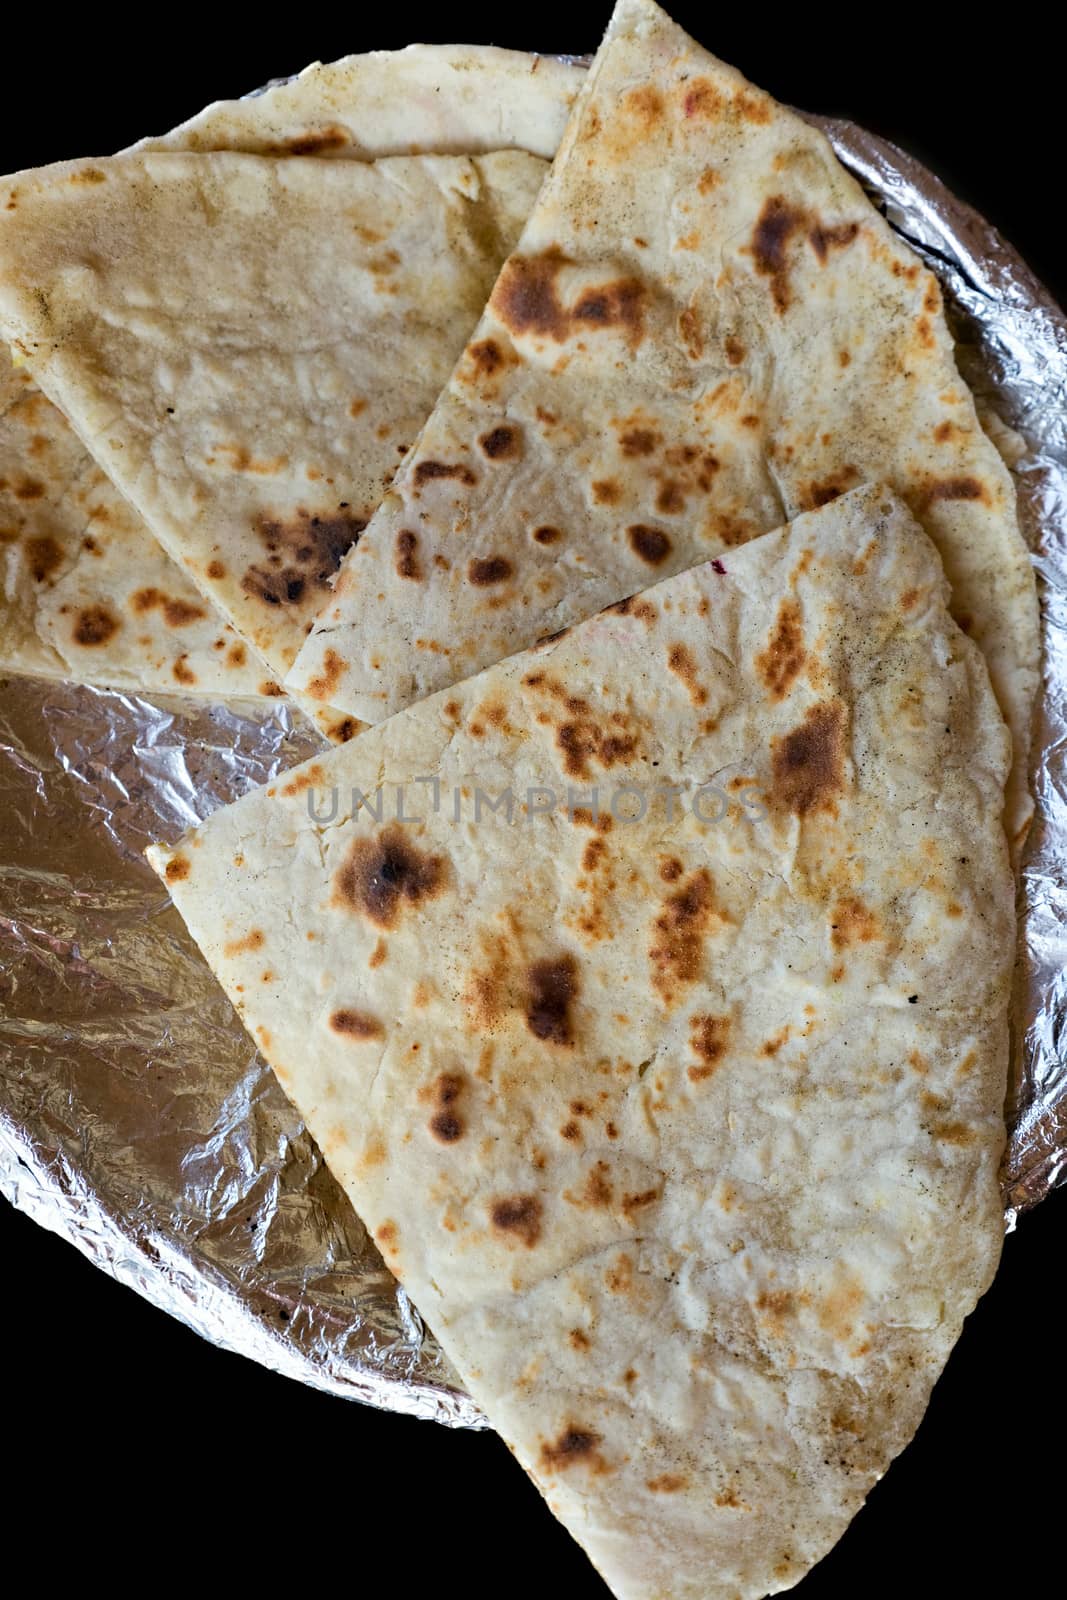 fried bread of india - cheese and Garlic Naan Indian Flatbread